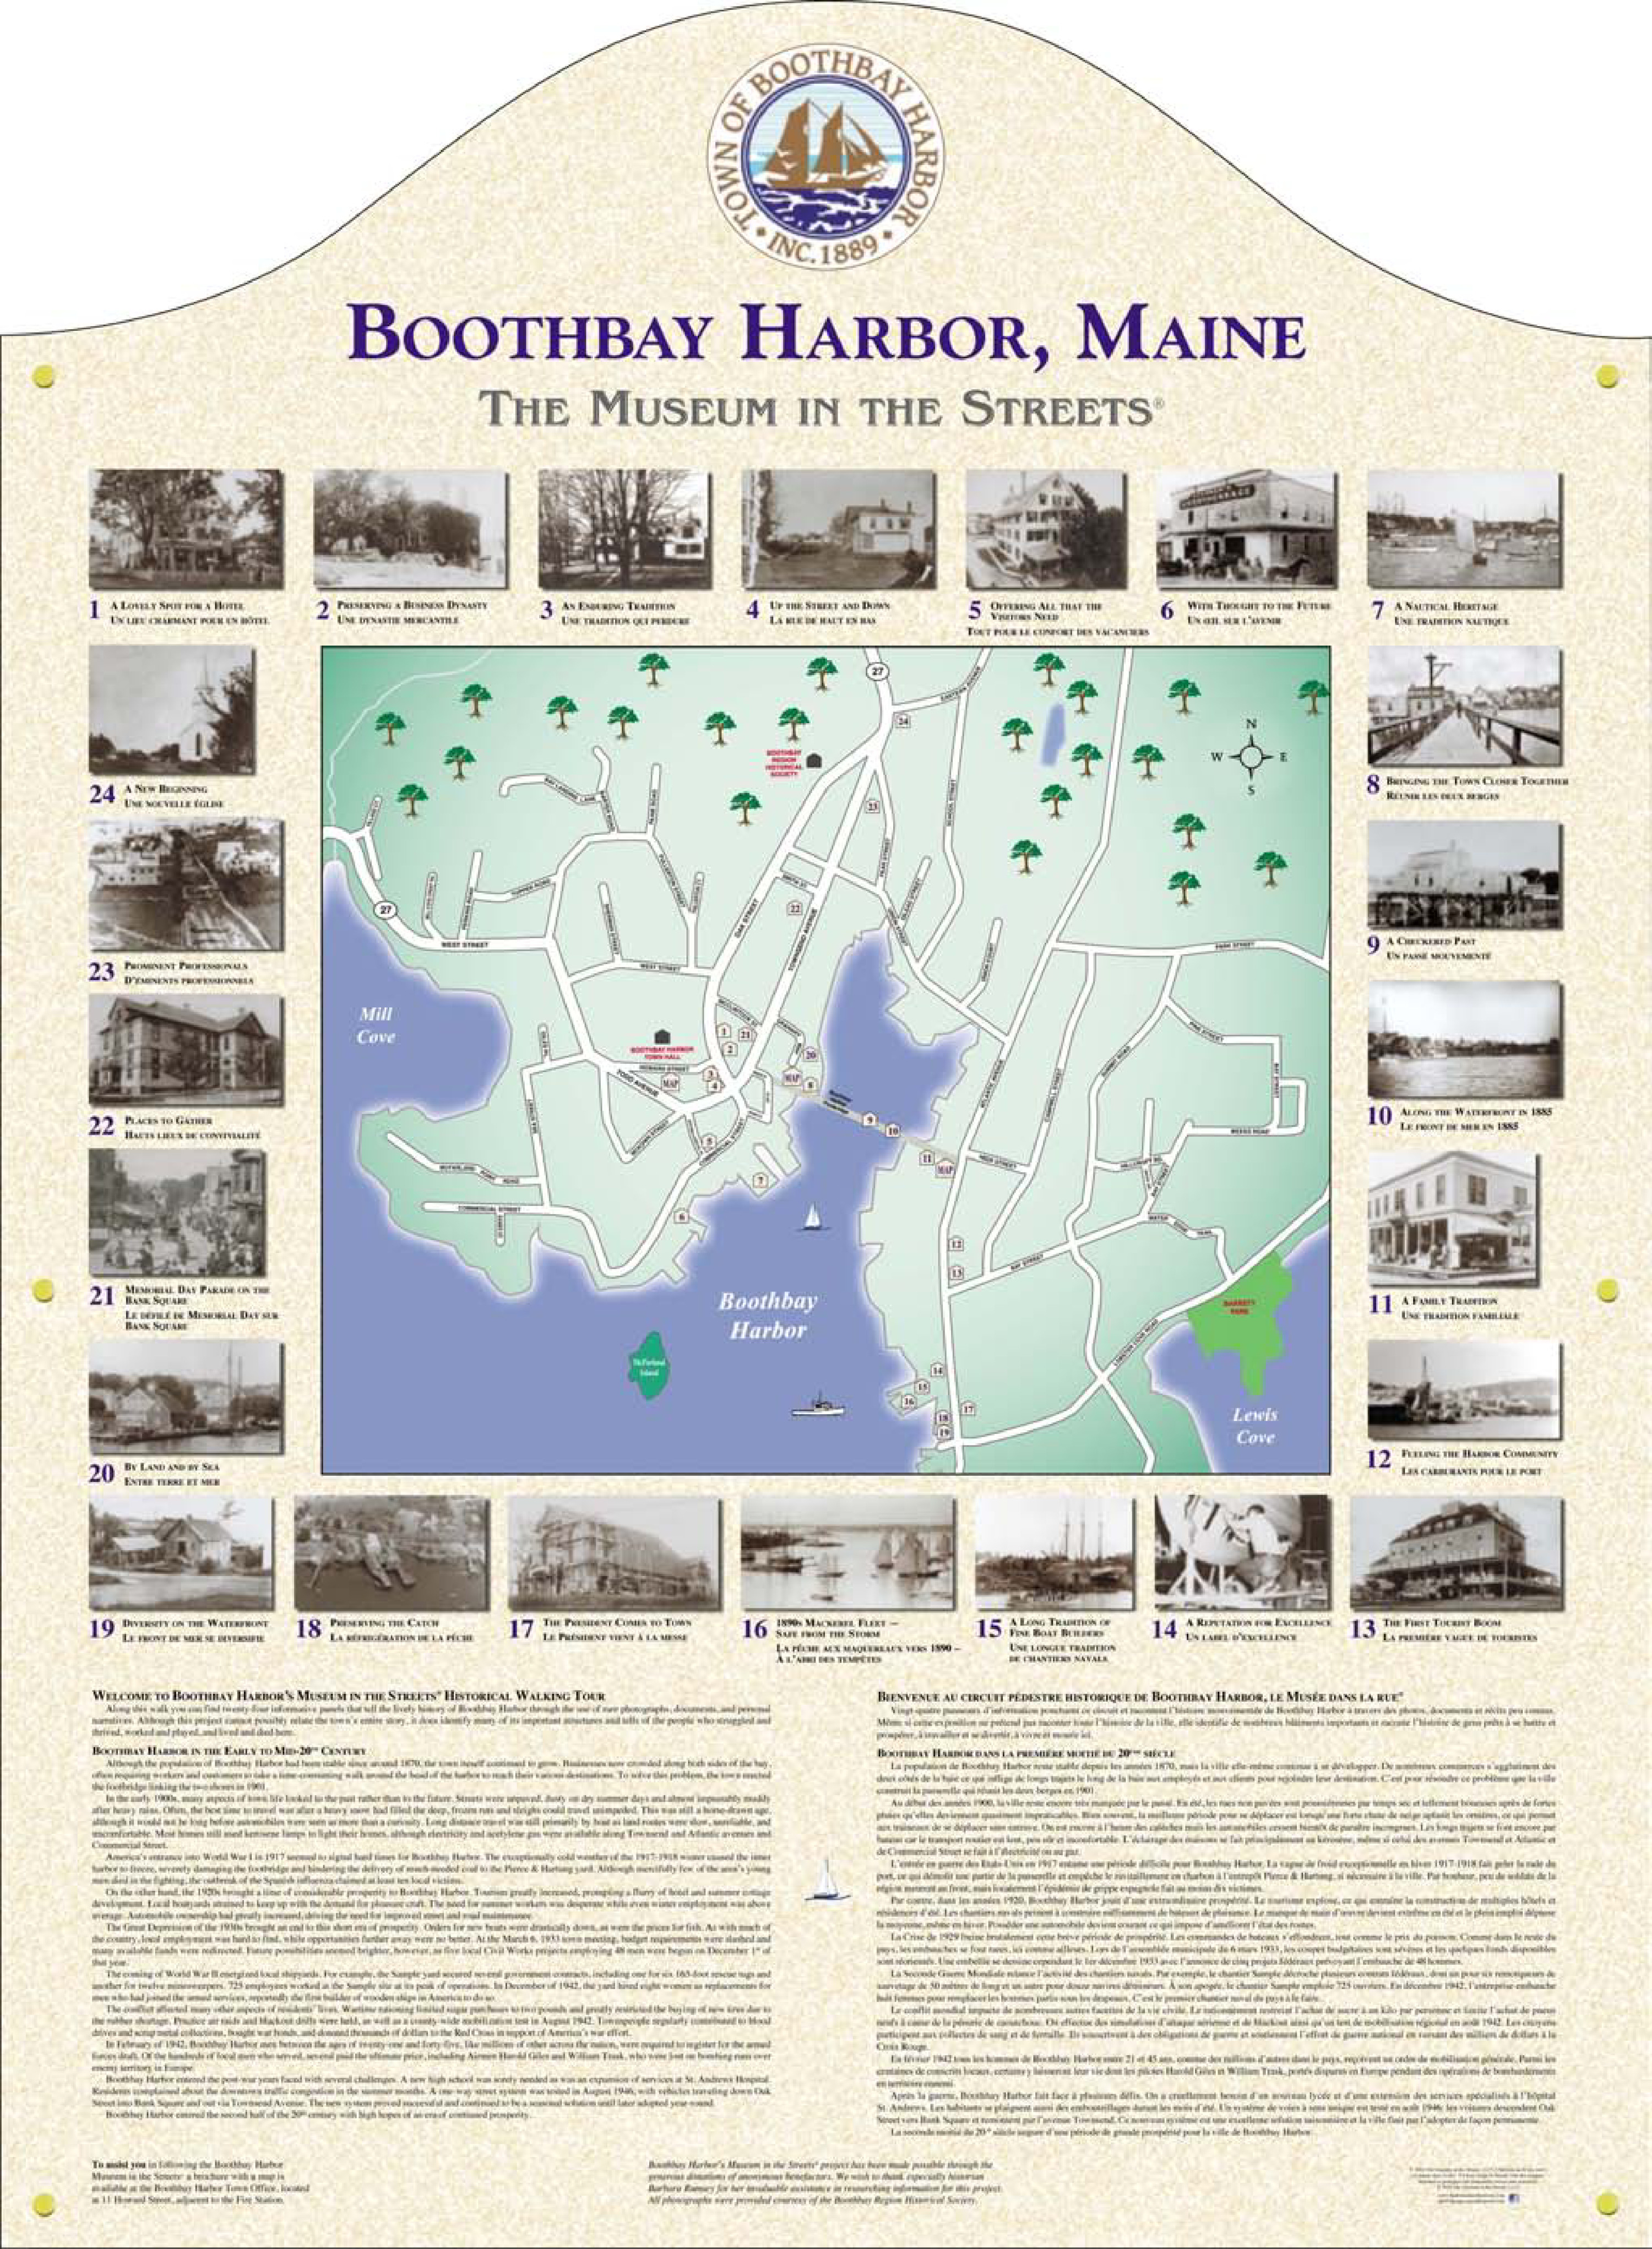 Boothbay Harbor Museum in the Streets